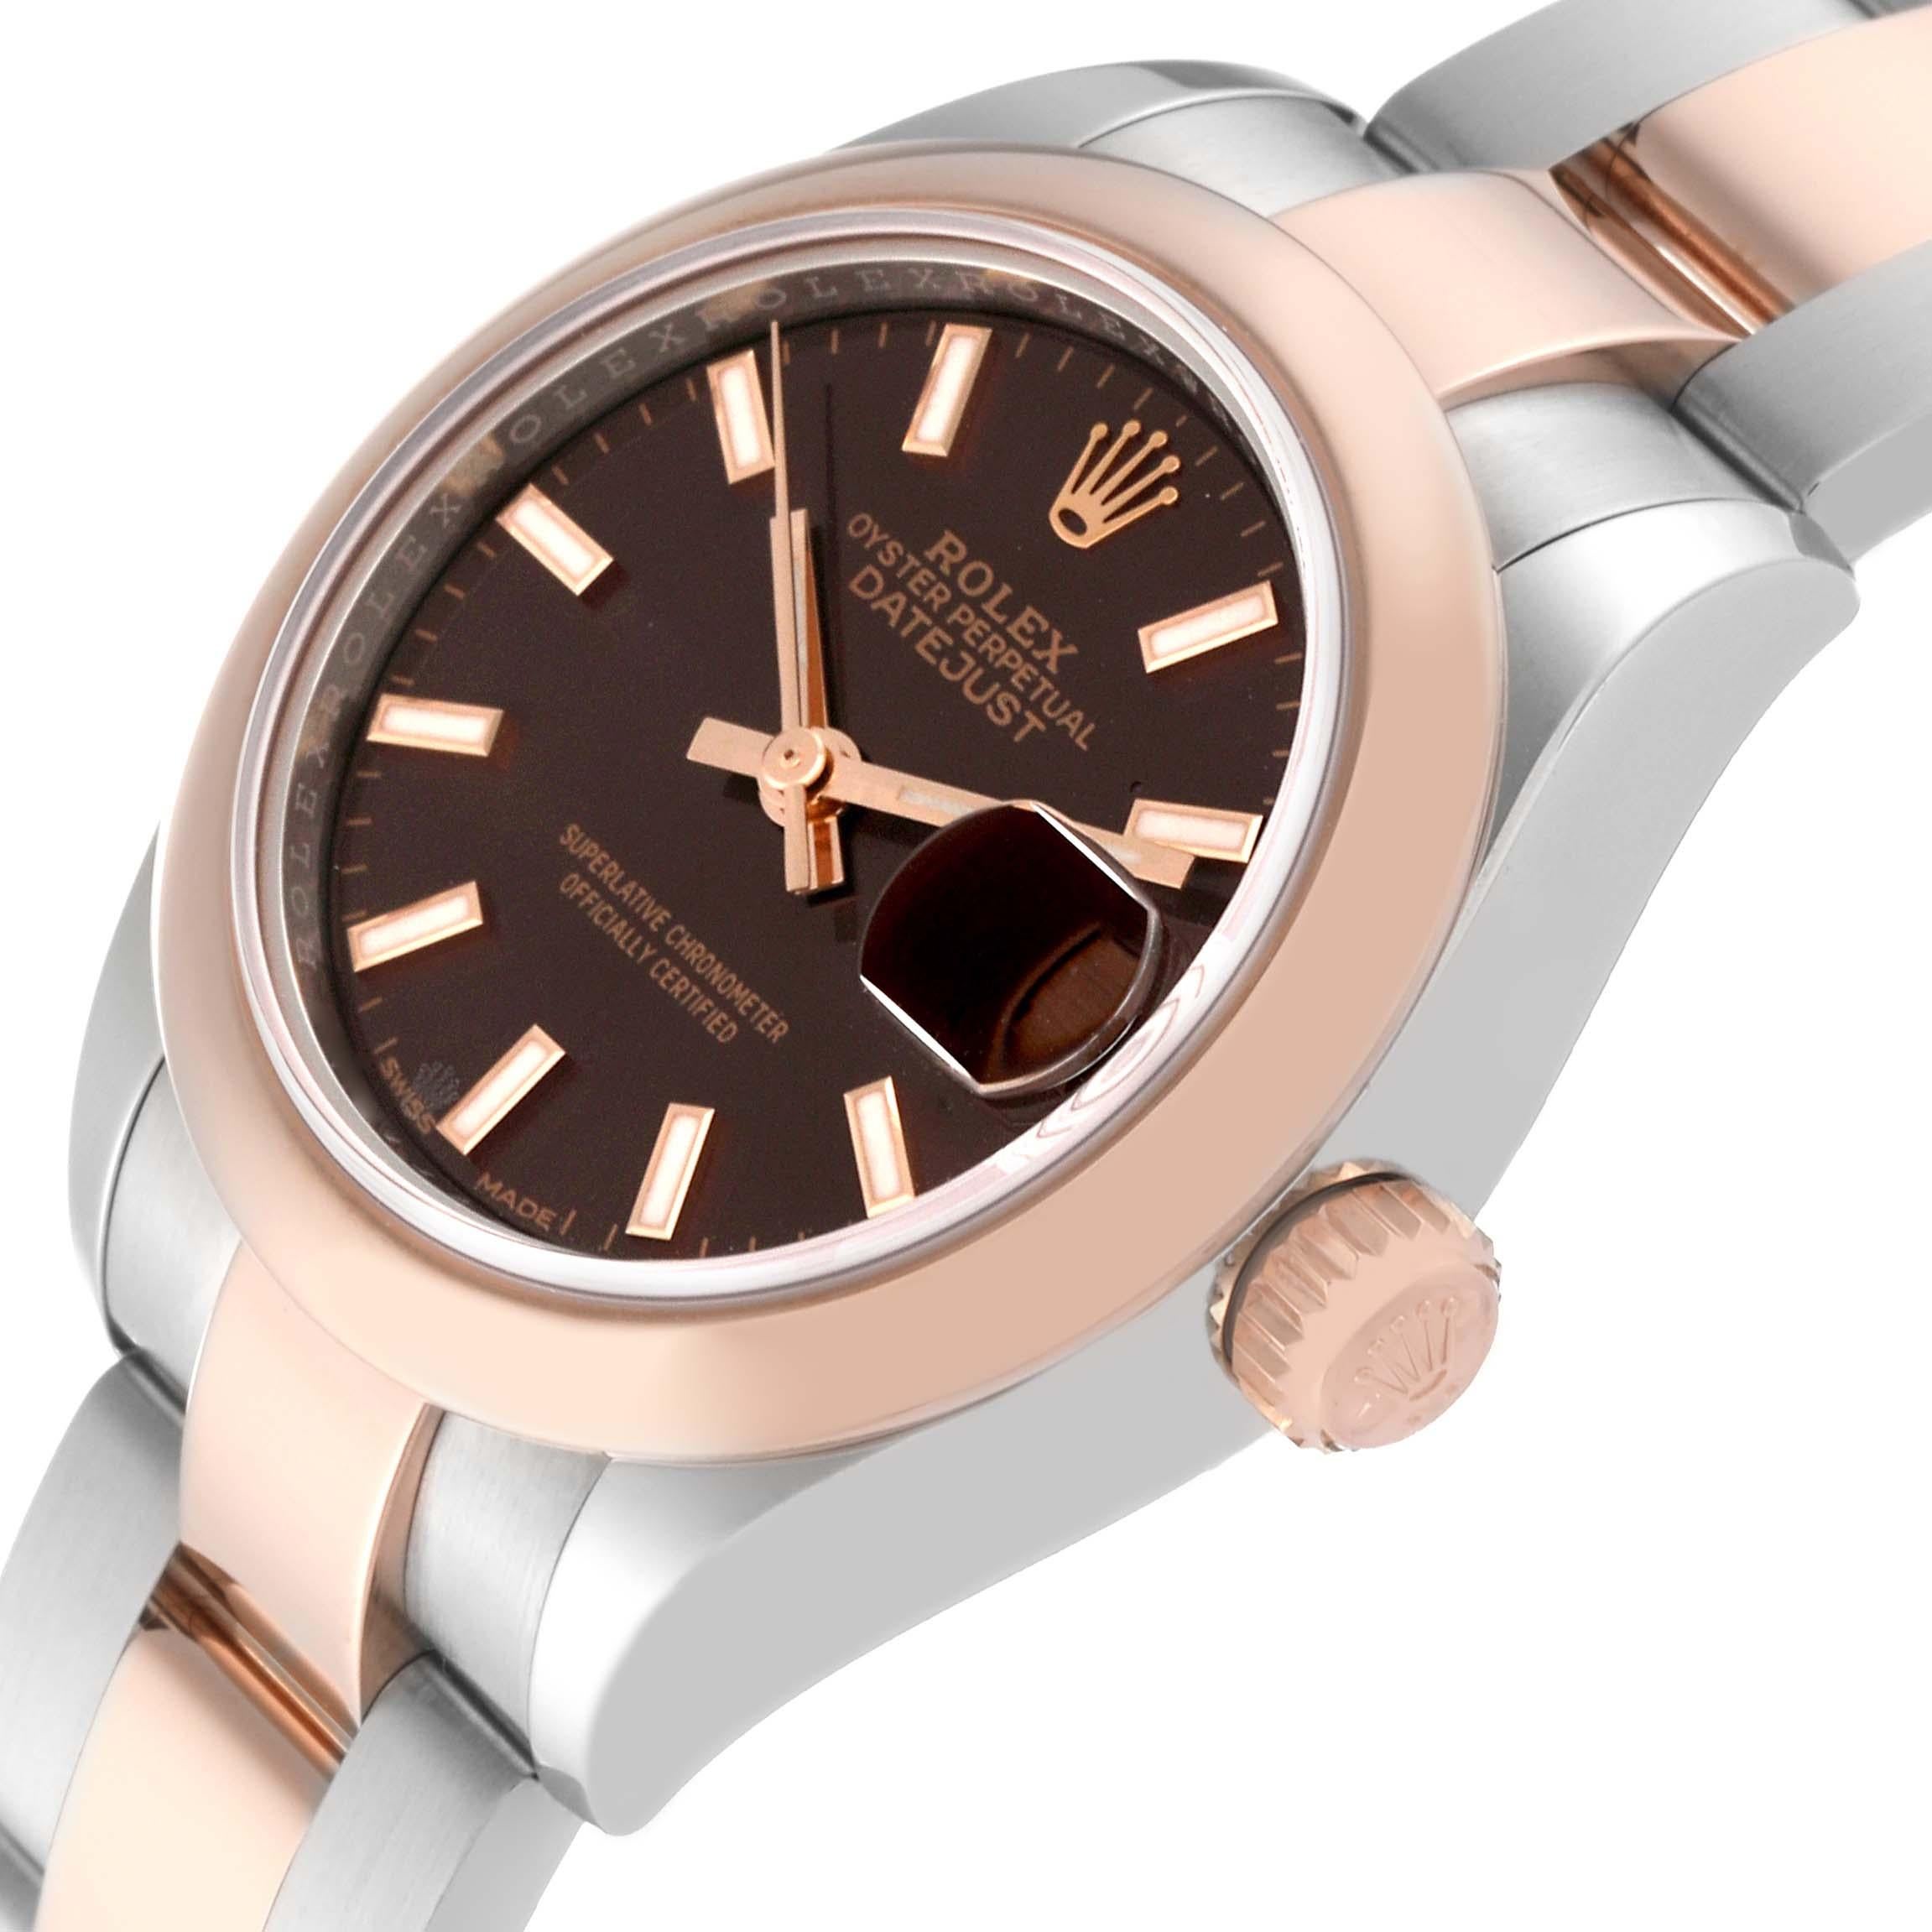 Women's Rolex Datejust Steel Rose Gold Brown Dial Ladies Watch 279161 Box Card For Sale